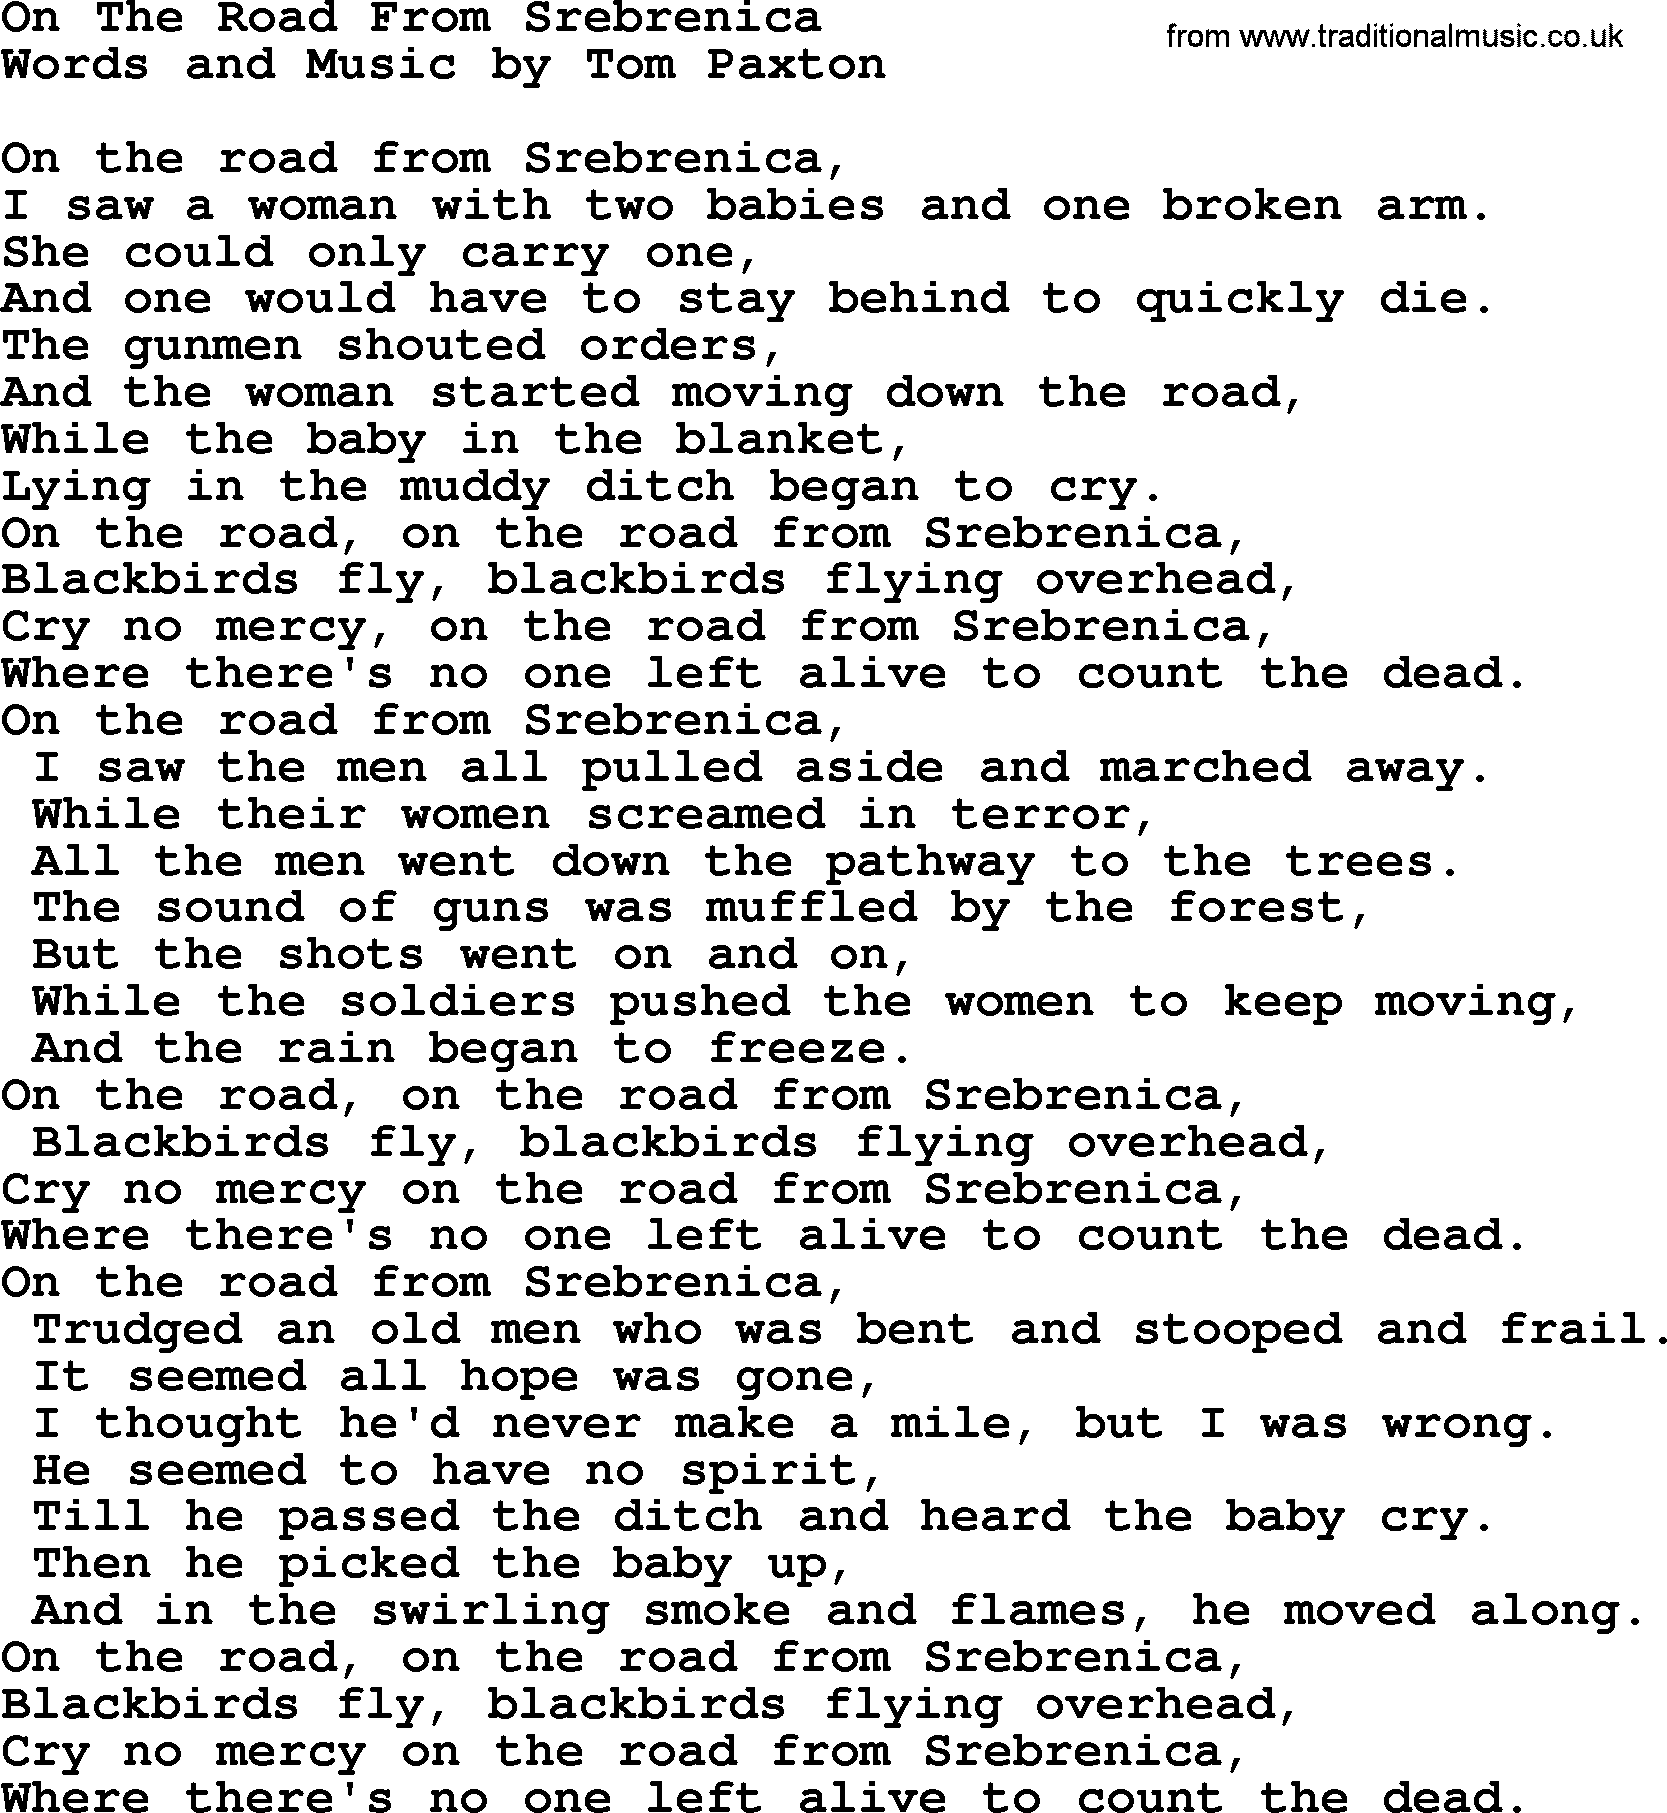 Tom Paxton song: On The Road From Srebrenica, lyrics